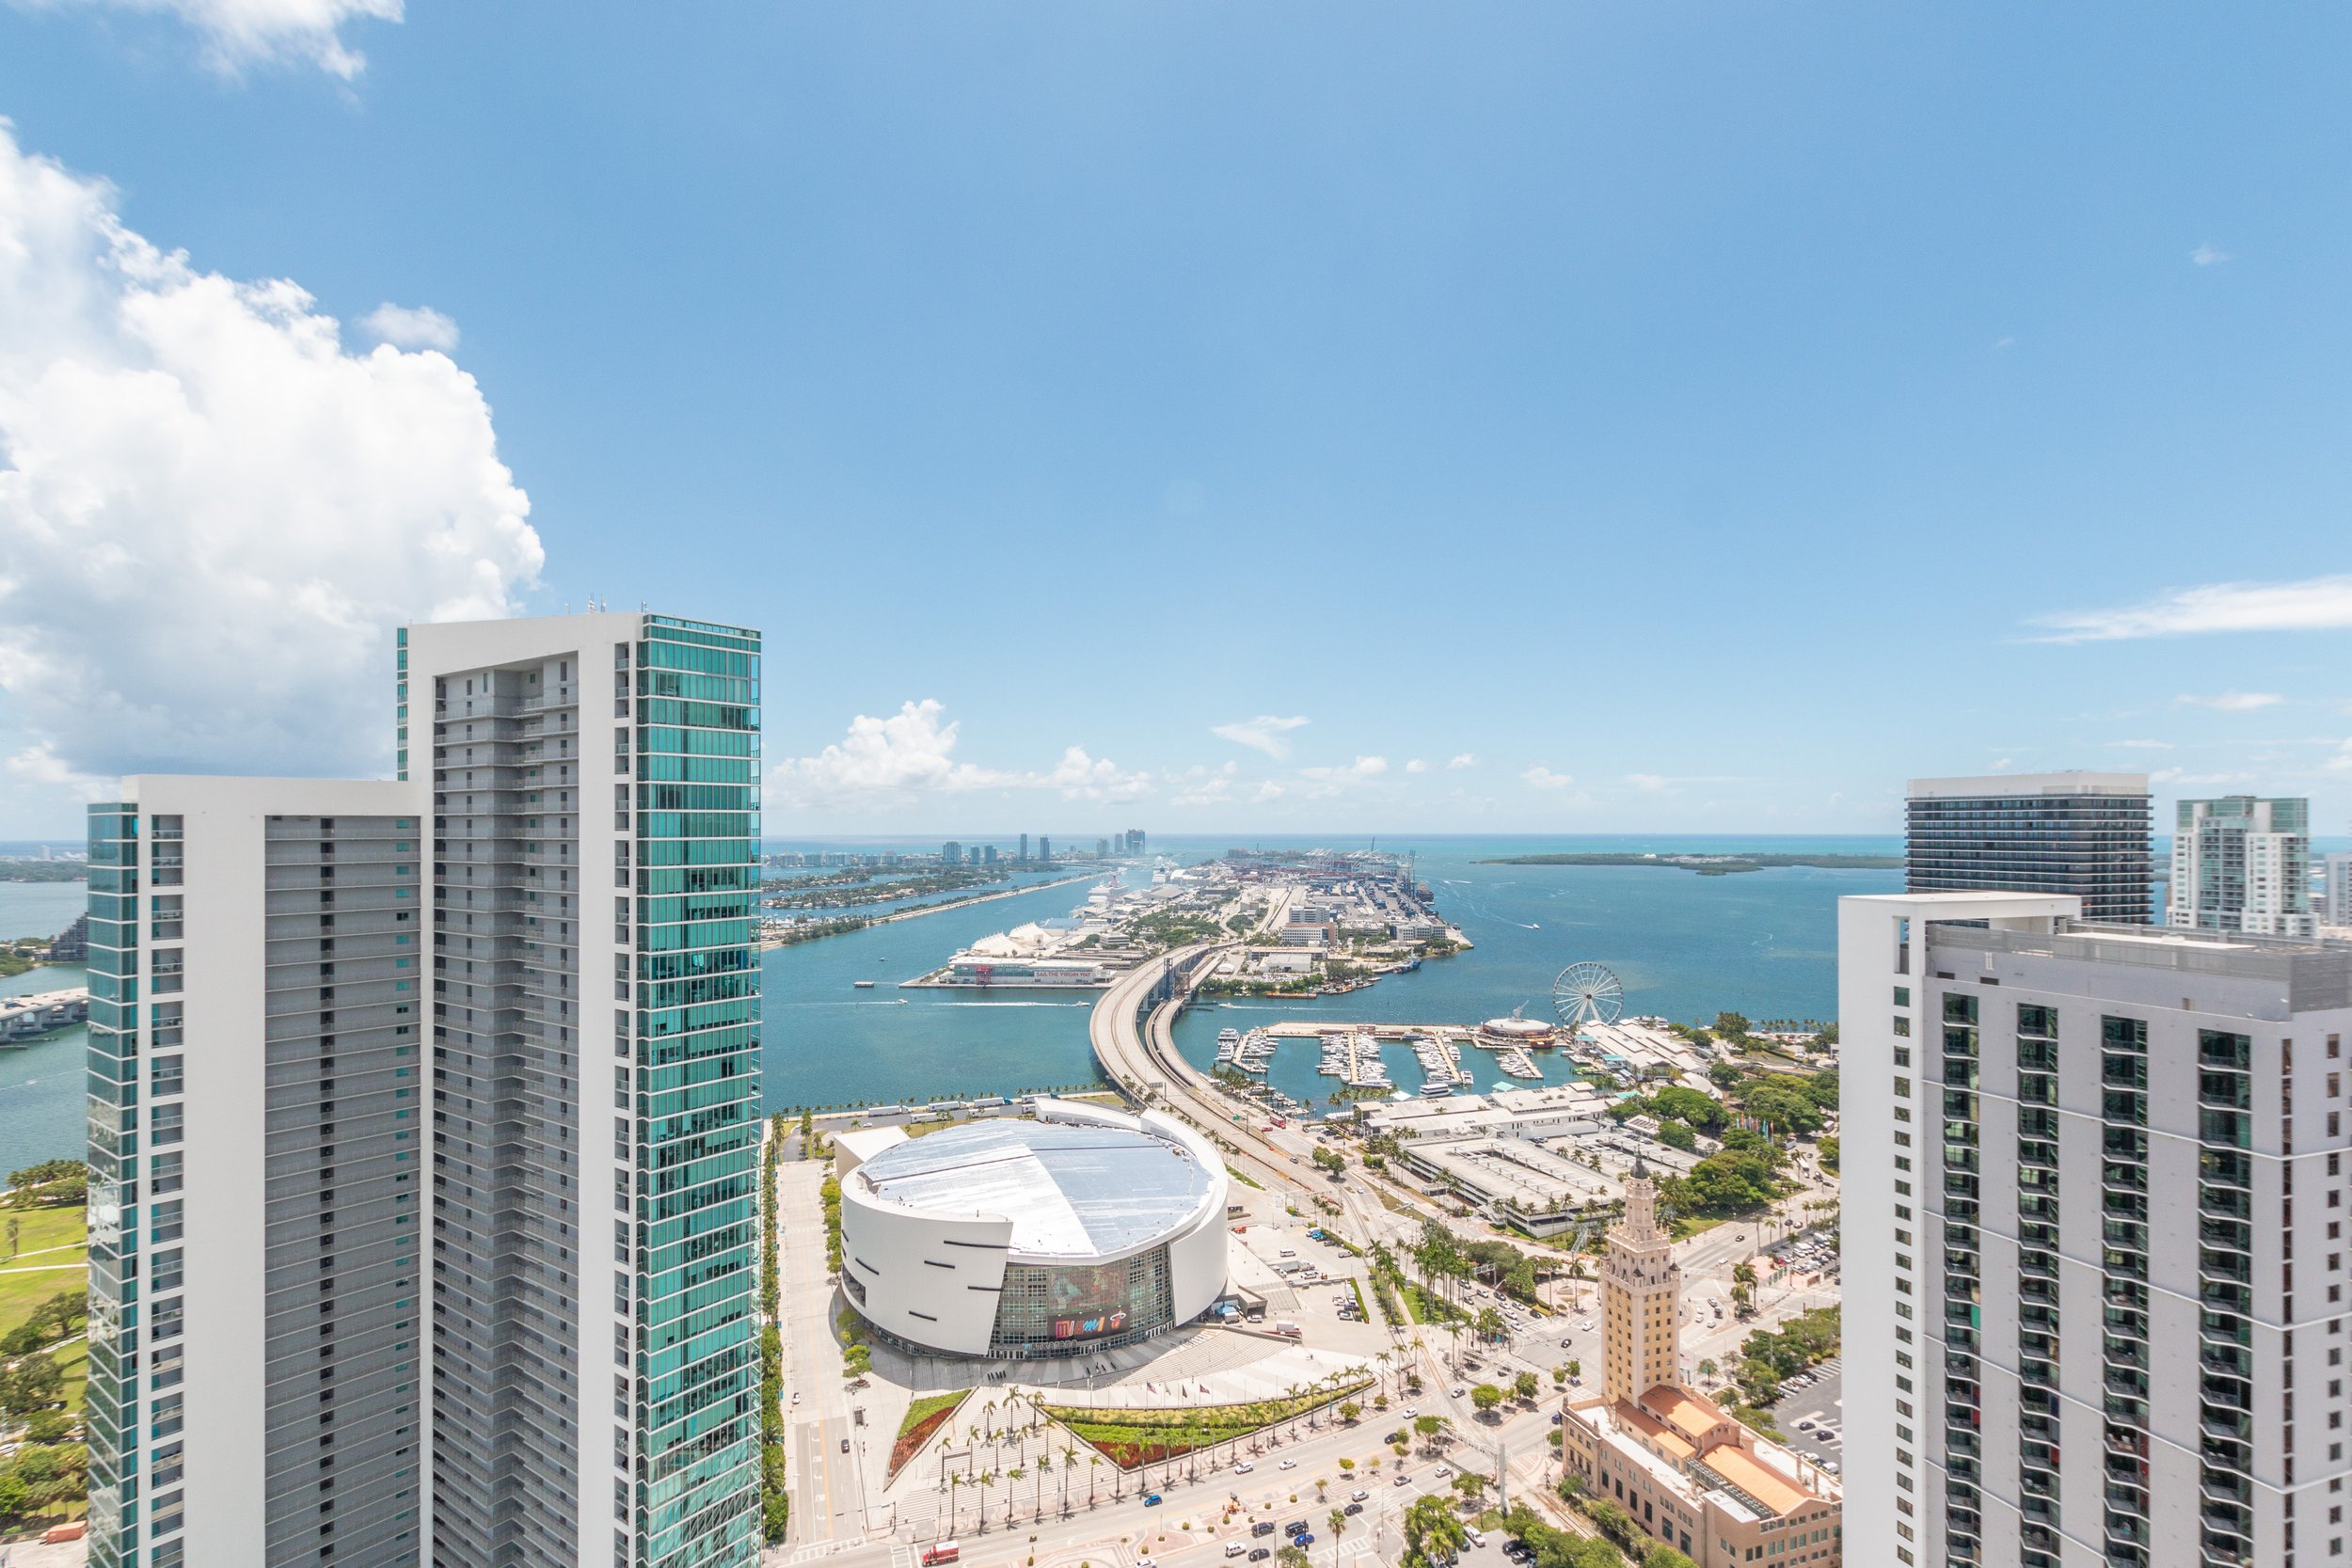 Step Inside A Sky-High Ultra-Luxe Penthouse At PARAMOUNT Miami Worldcenter For Rent Asking $40K Per Month ALTARA Properties Scott Lawrence Porter 1.34.jpg